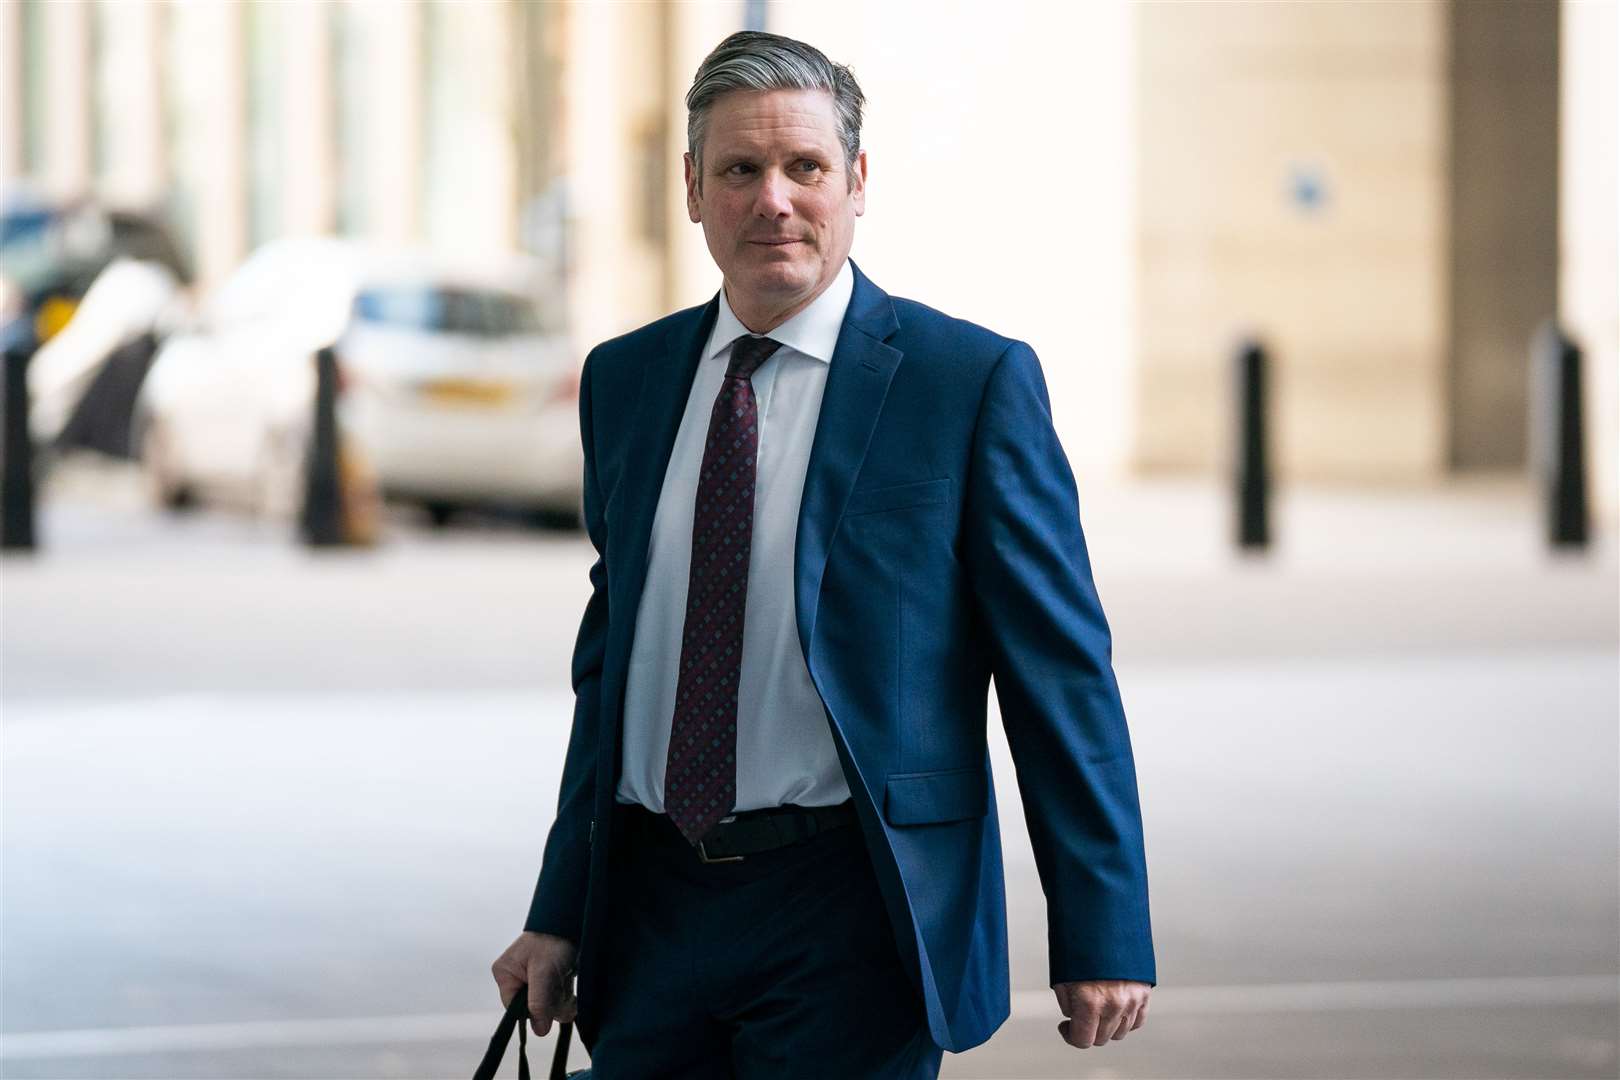 Sir Keir Starmer says he wants to win over voters who did not support Labour (Aaron Chown/PA)